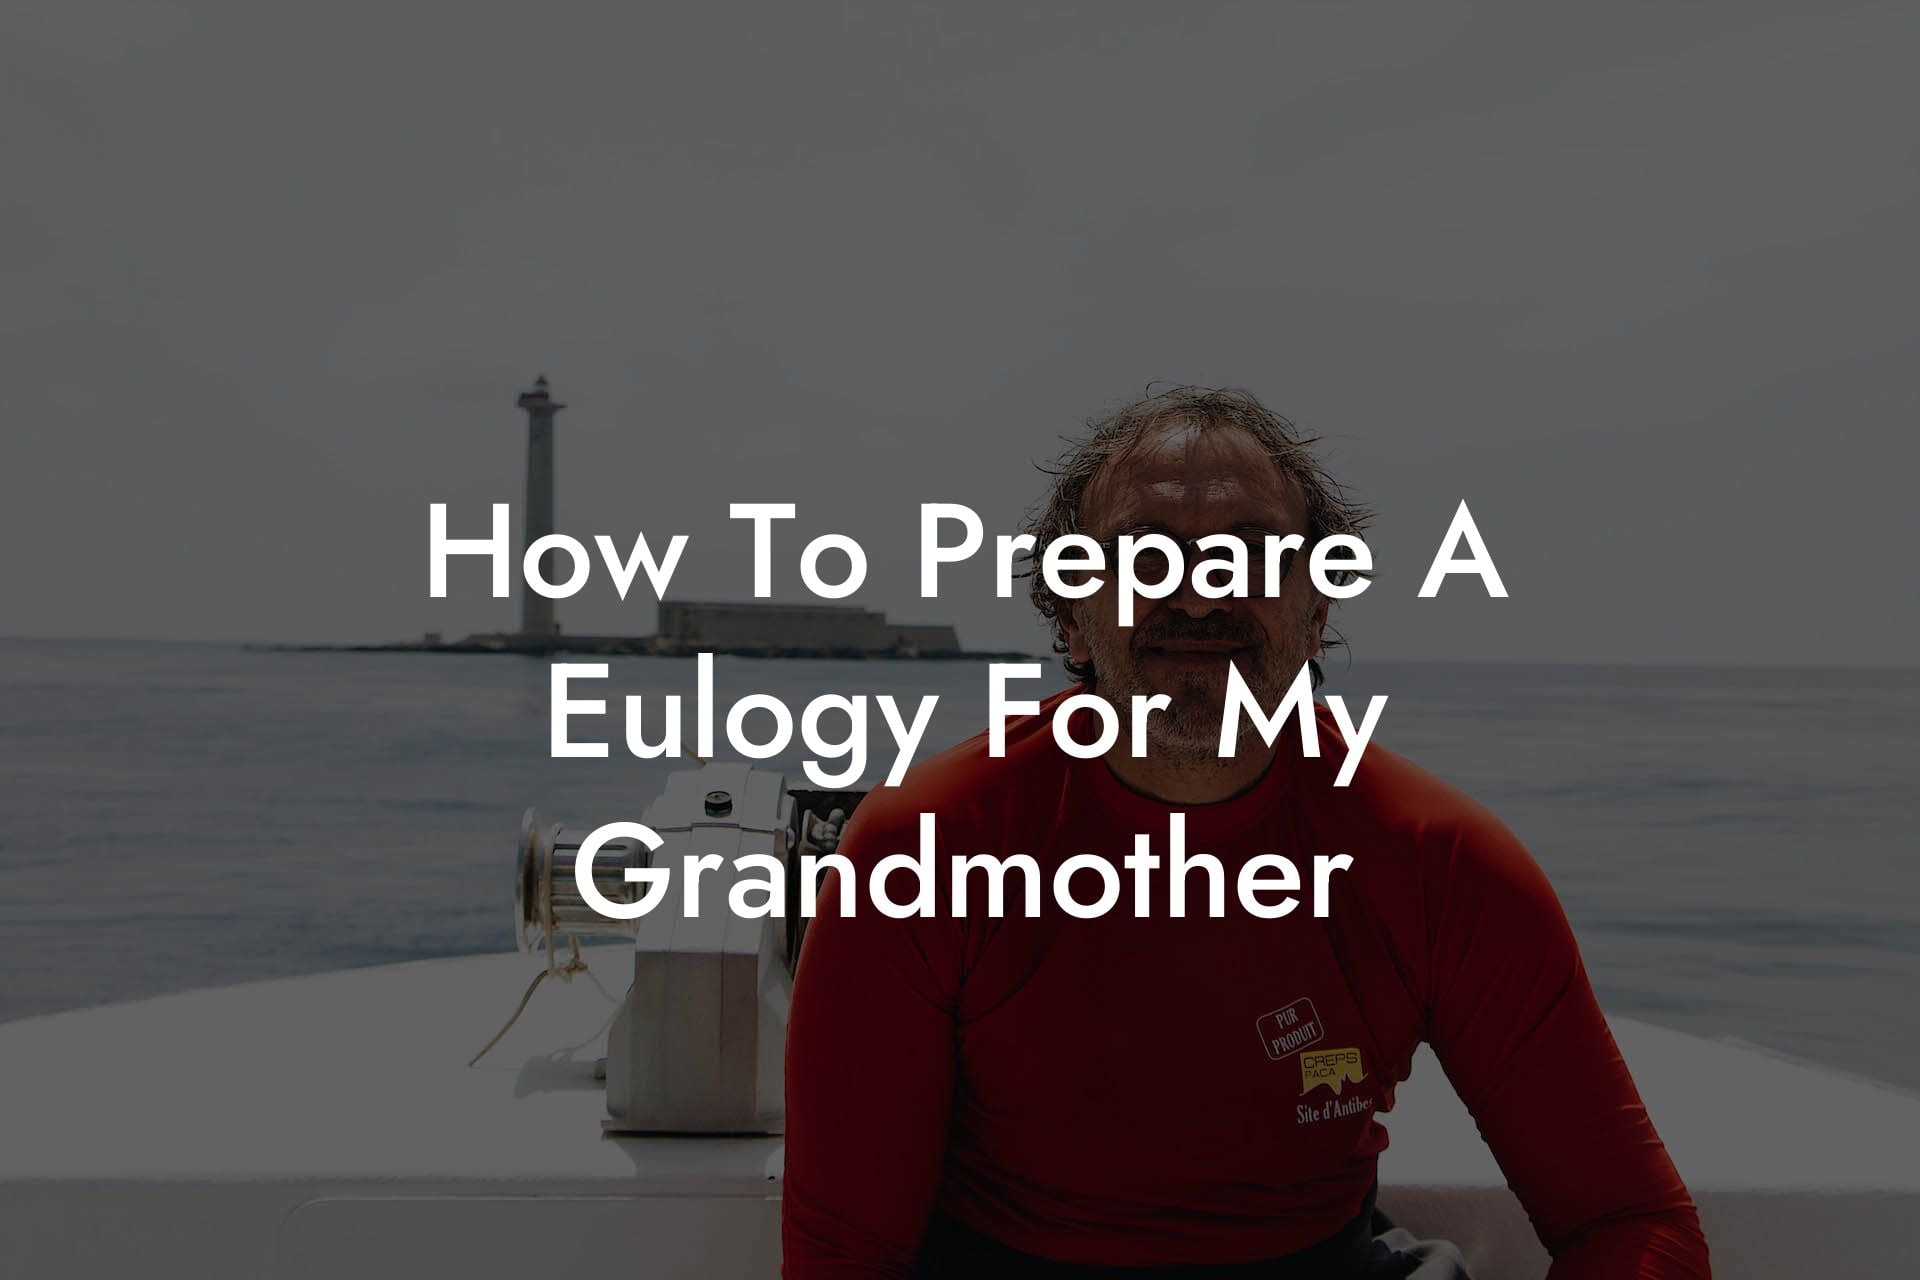 How To Prepare A Eulogy For My Grandmother